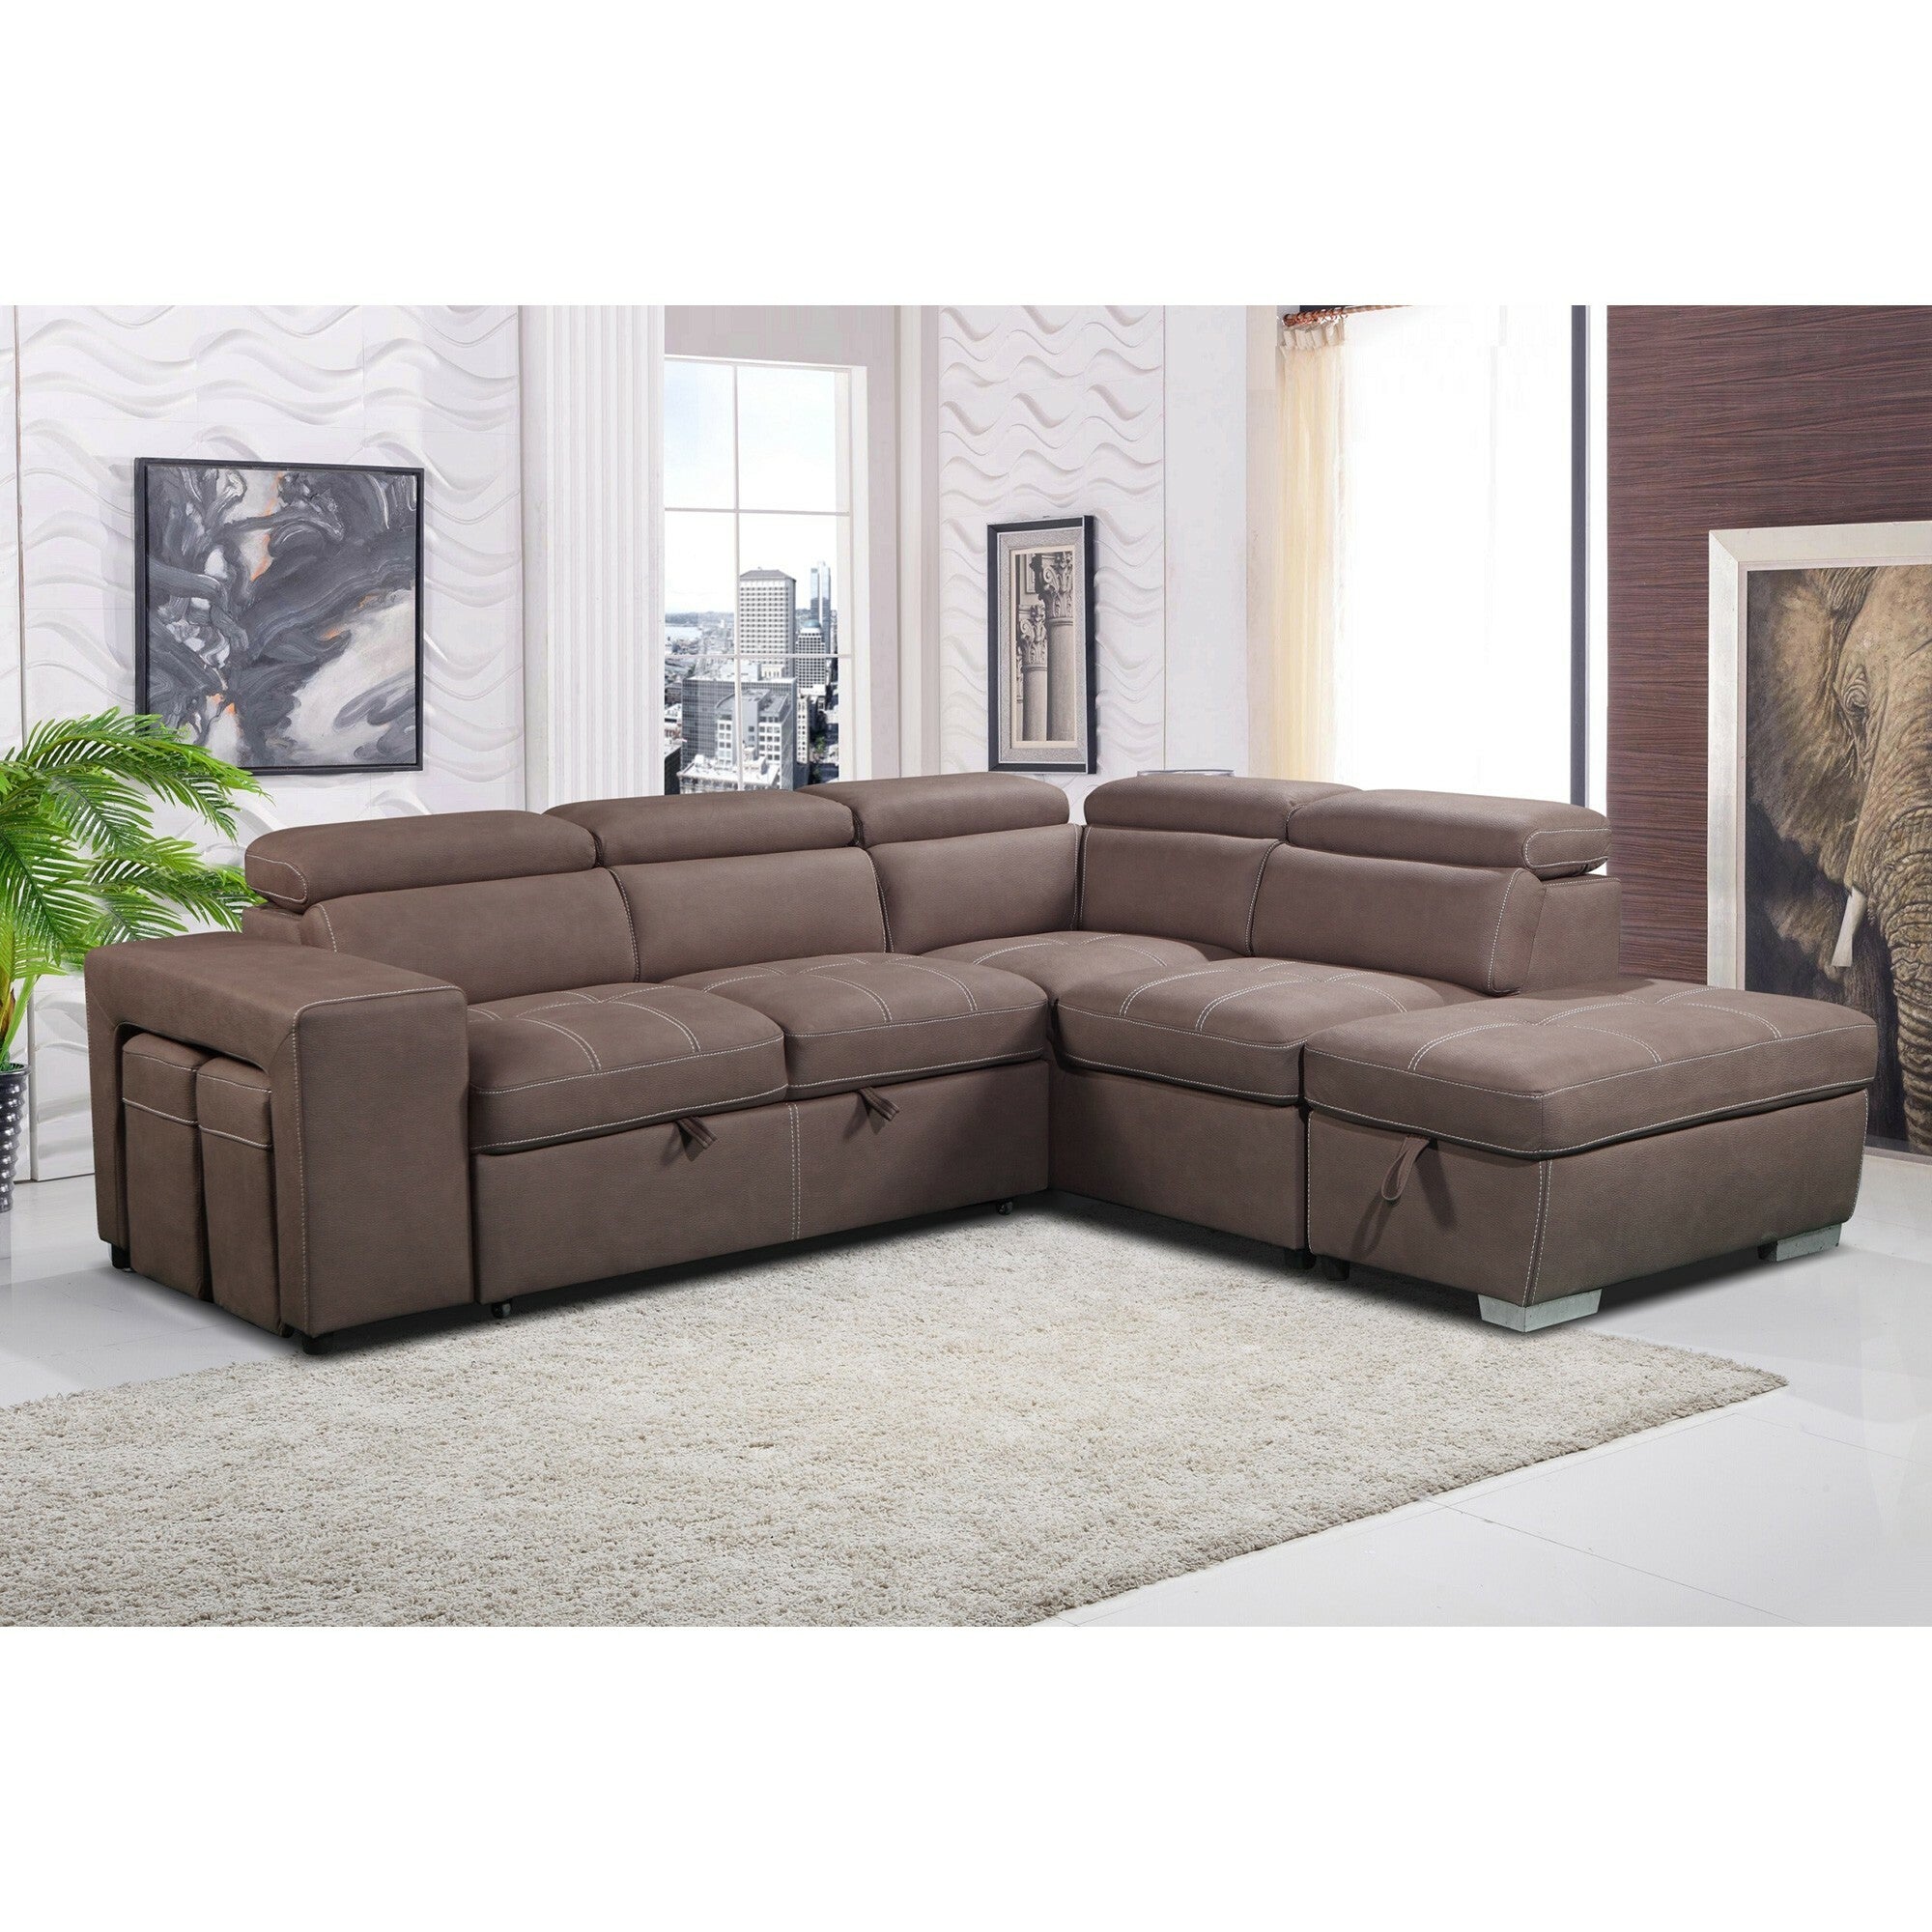 Peoria Fabric Corner Sofa / Pull Out Sofa Bed, 2 Seater with RHF Chaise & Ottomans